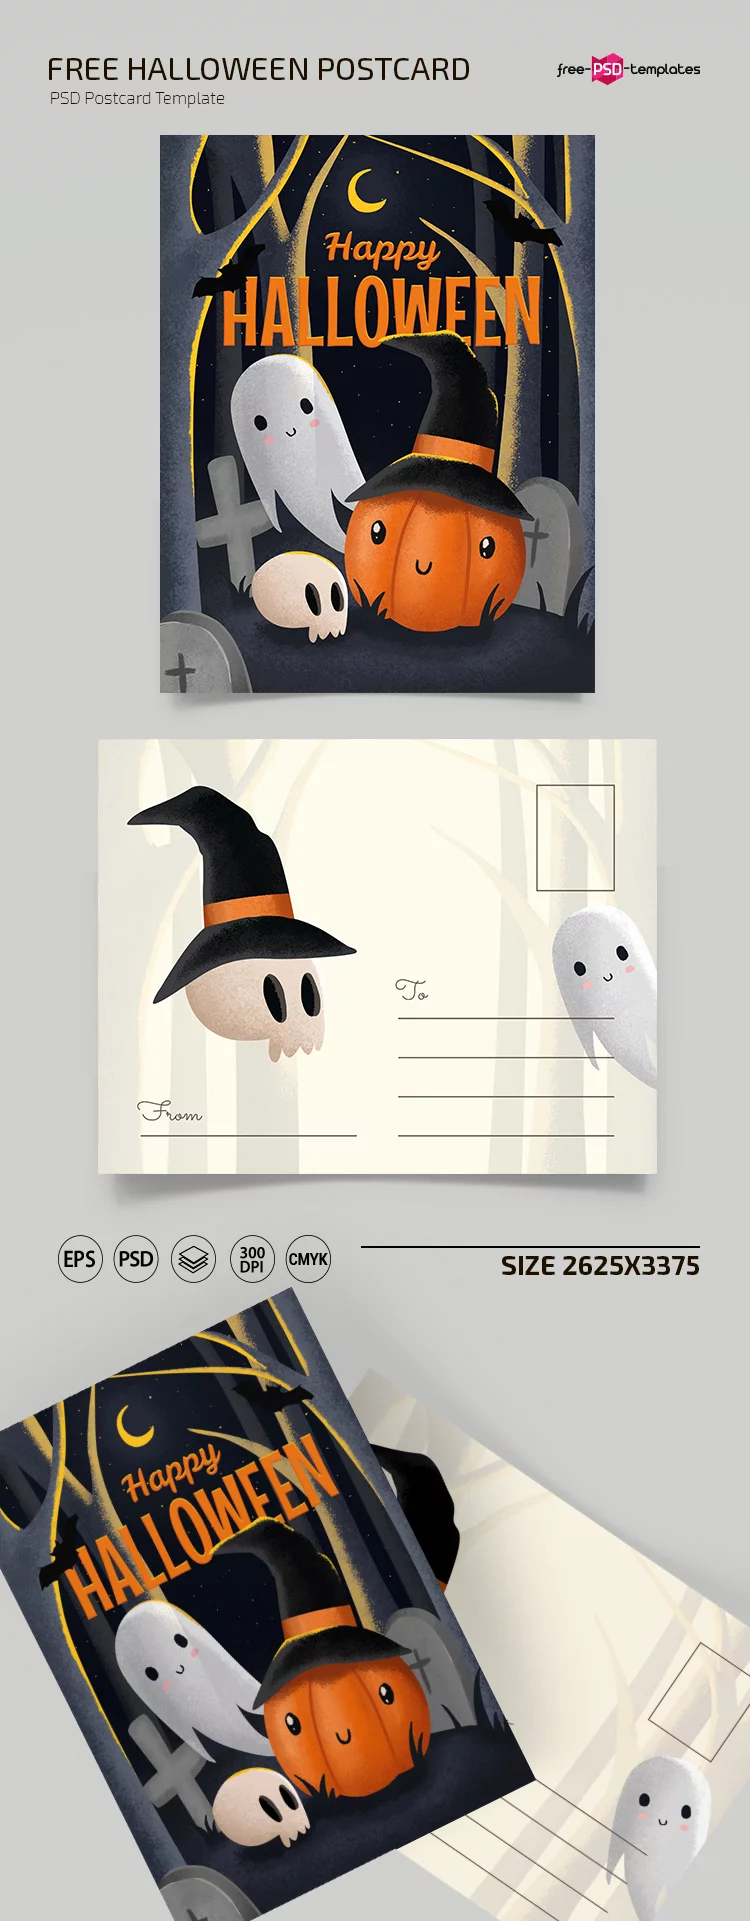 Free Halloween Postcard Templates in PSD + EPS